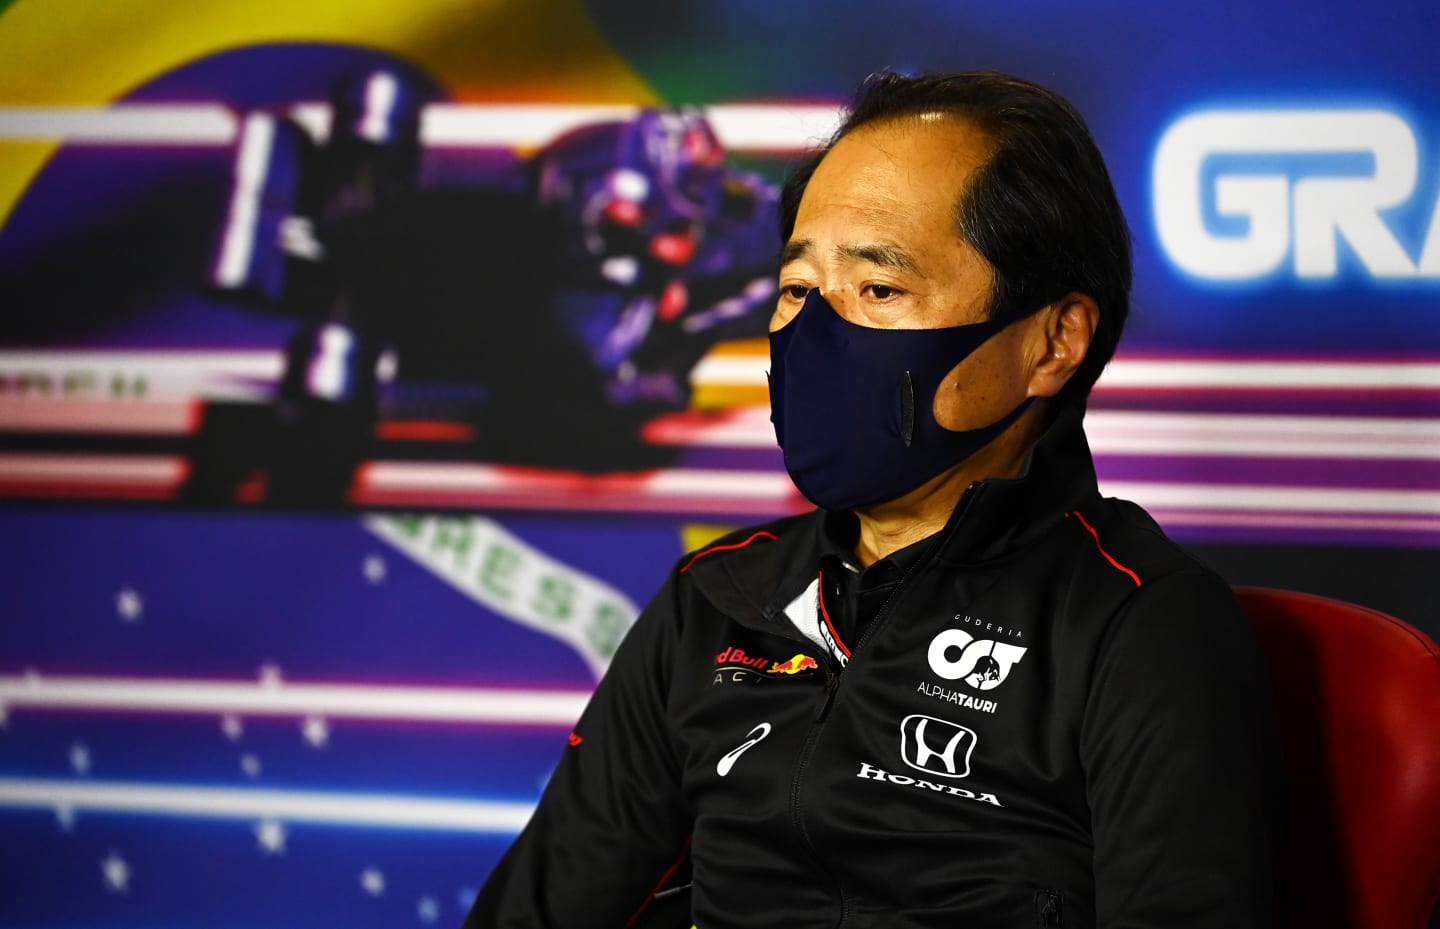 SAO PAULO, BRAZIL - NOVEMBER 12: Toyoharu Tanabe of Honda talks in the Team Principals Press Conference after practice ahead of the F1 Grand Prix of Brazil at Autodromo Jose Carlos Pace on November 12, 2021 in Sao Paulo, Brazil. (Photo by Clive Mason/Getty Images)